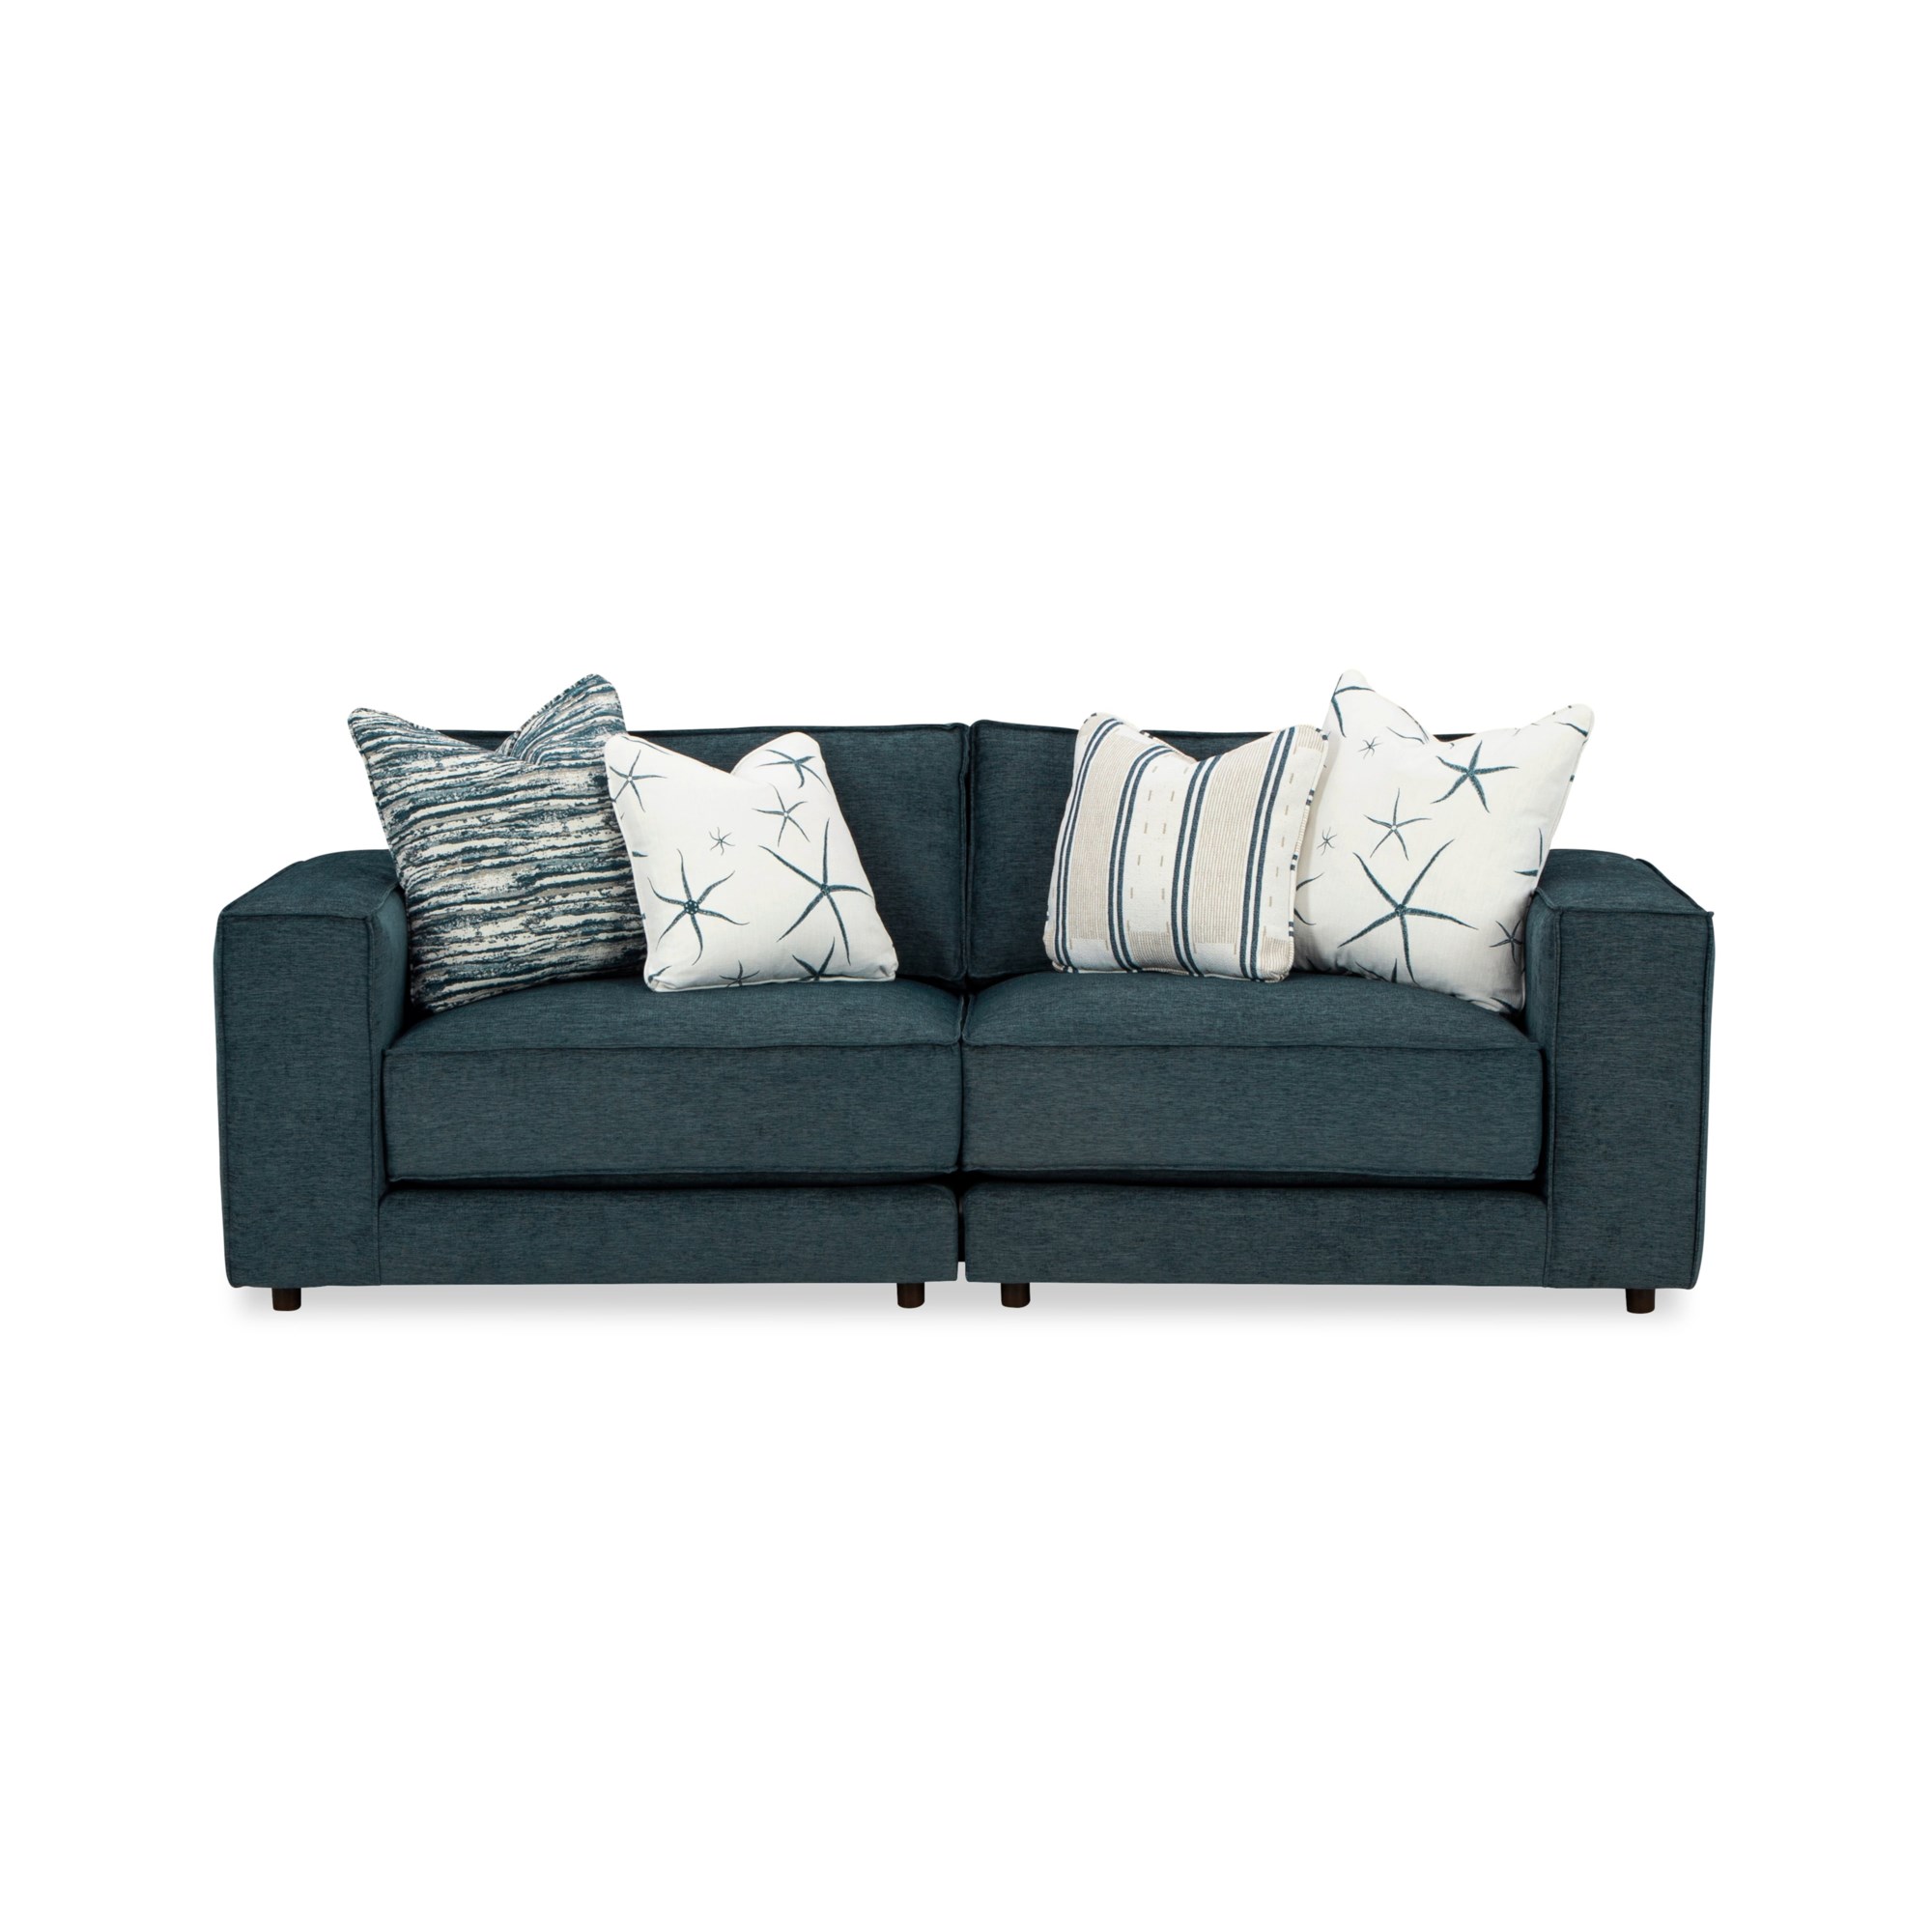 734801BD ROBBIE-23 Sofa Furniture Modular Seats Stationary Contemporary with - Home Craftmaster Collections 2 Uph | Sofas | 734819BDx1+734818BDx1